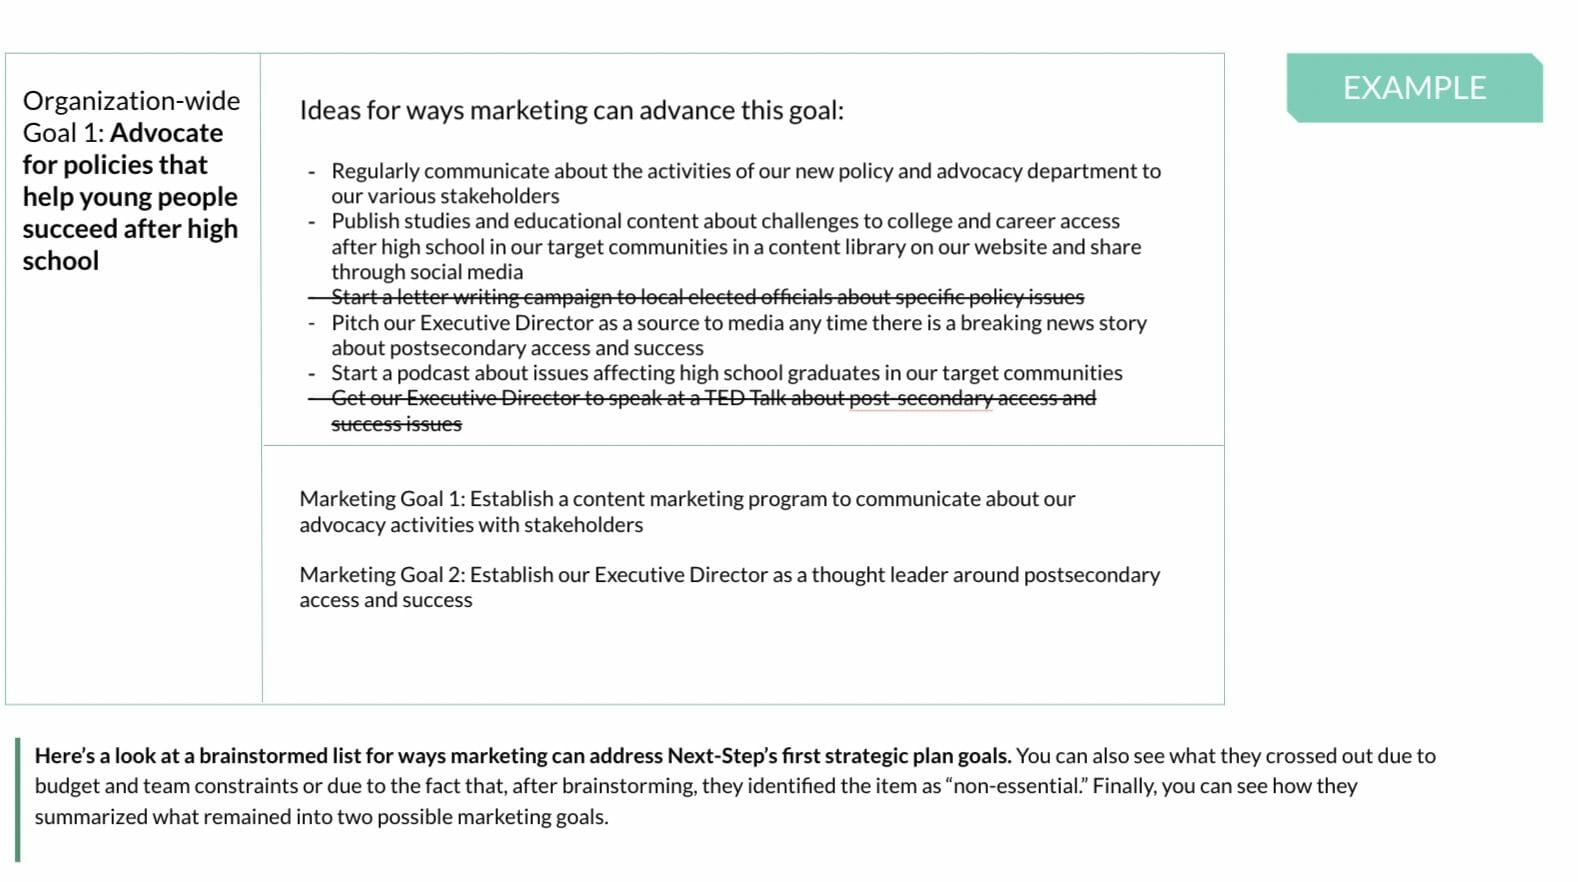 A sample page from the Essential Nonprofit Marketing Plan Template shows an example brainstorming chart to develop marketing goals that support an organization-wide goal. 